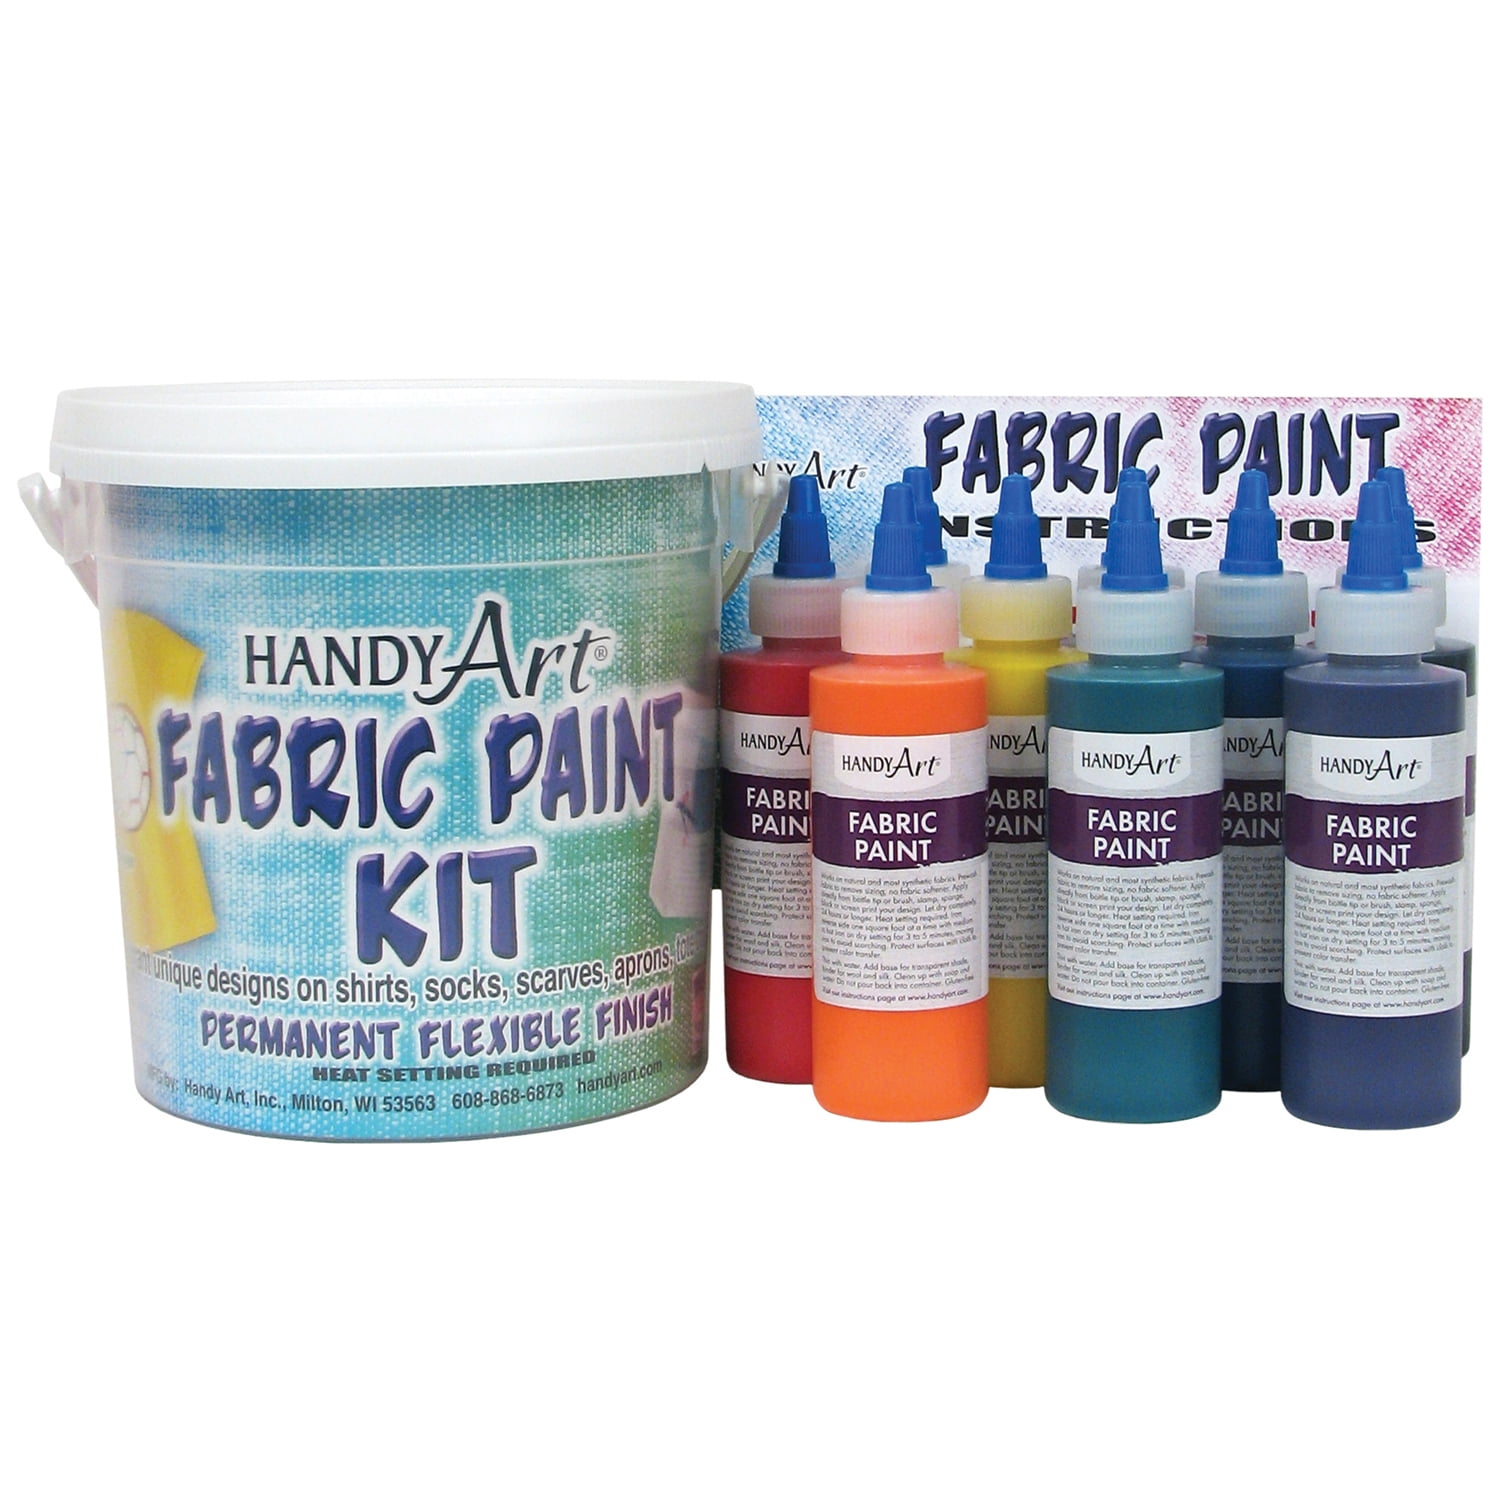 Rainbow Dimensional Fabric Paint Set by ArtMinds™